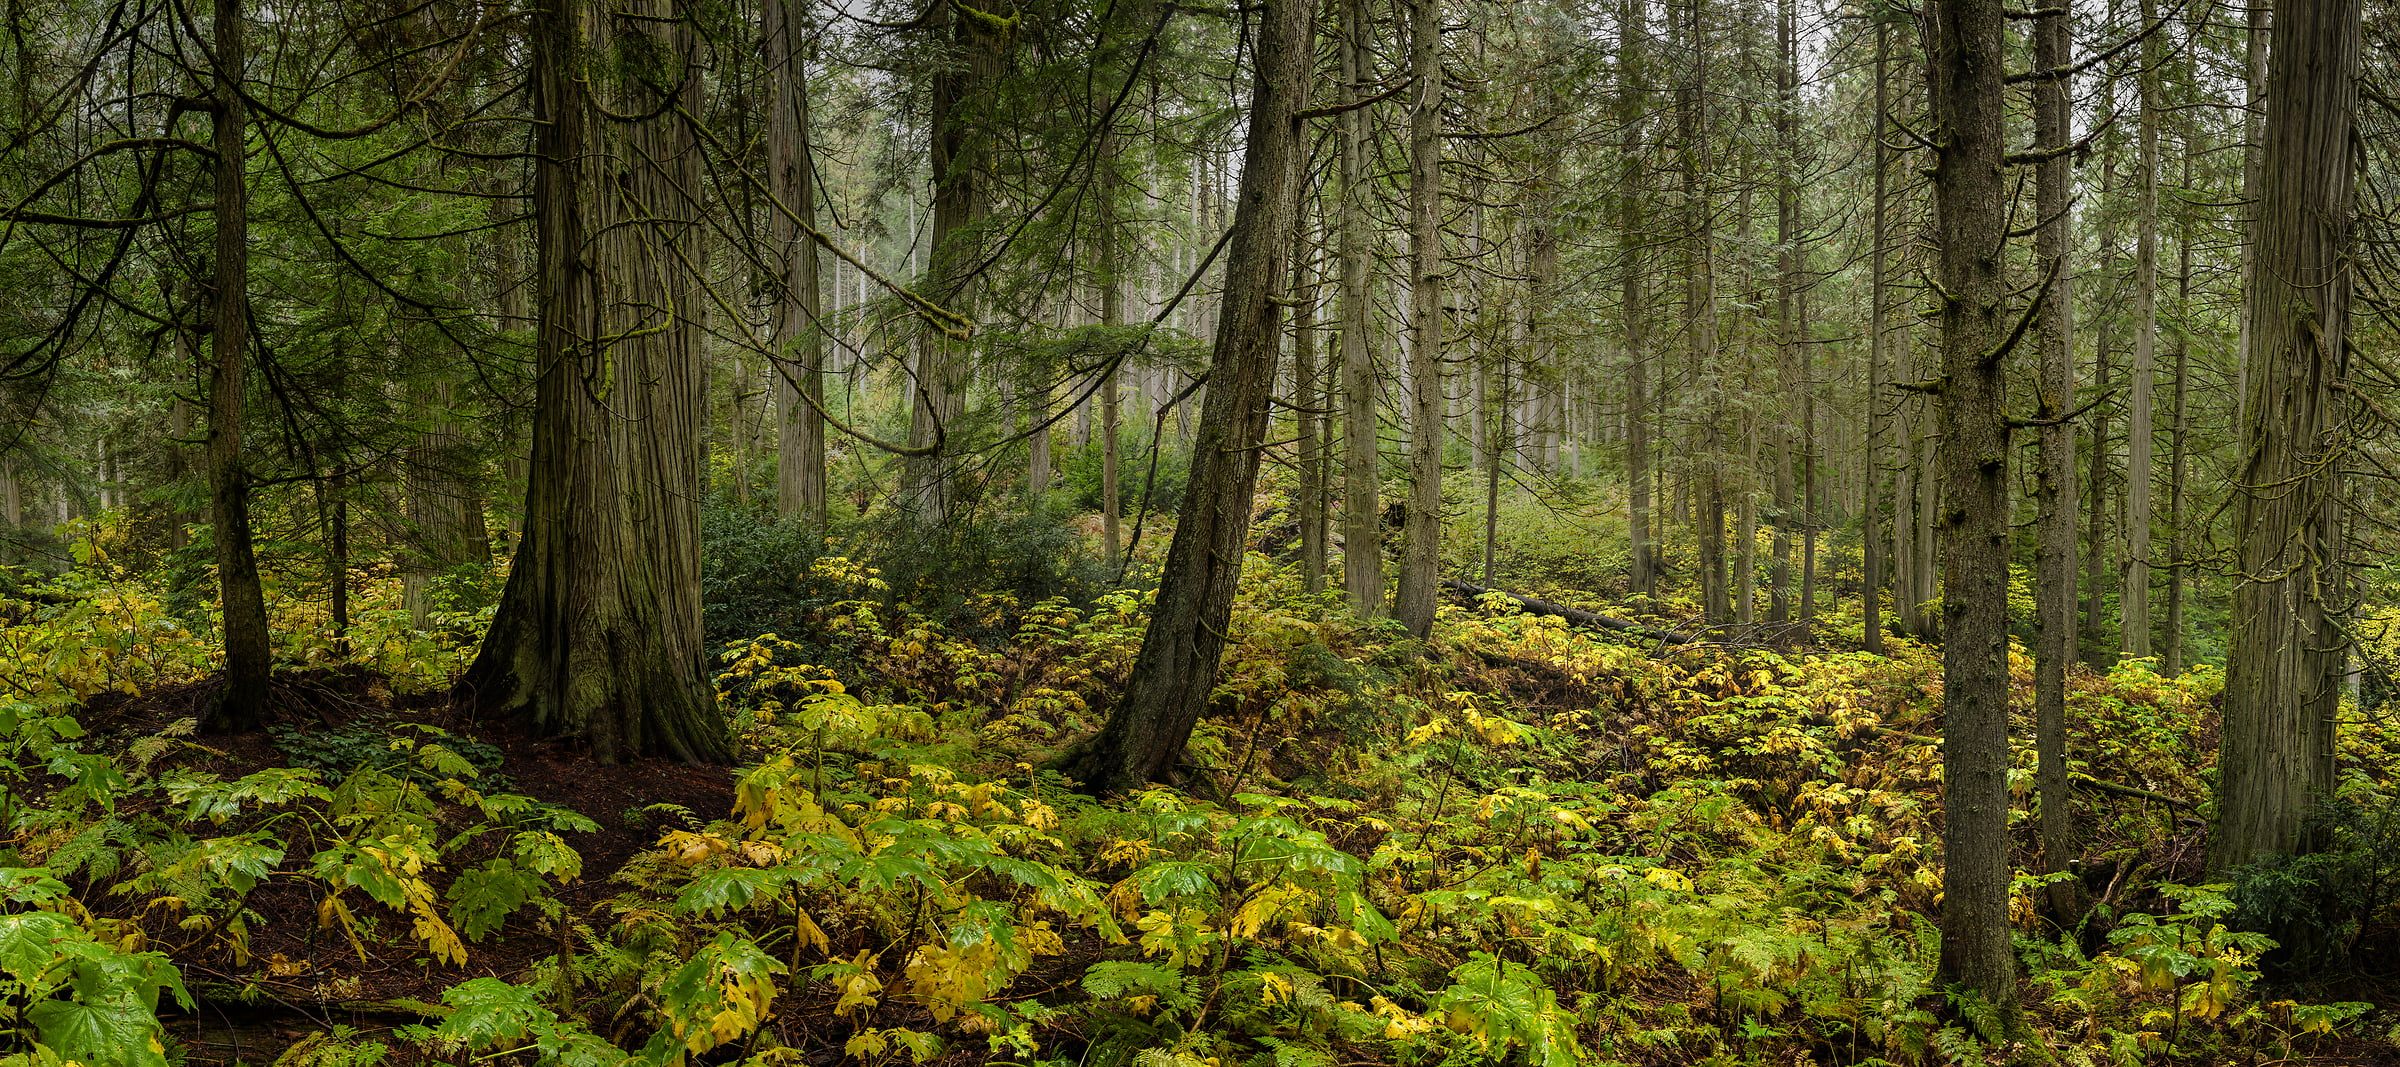 2,190 megapixels! A very high resolution, large-format VAST photo print of a forest with cedar trees and ferns; nature photograph created by Scott Dimond in Mount Revelstoke National Park, British Columbia, Canada.